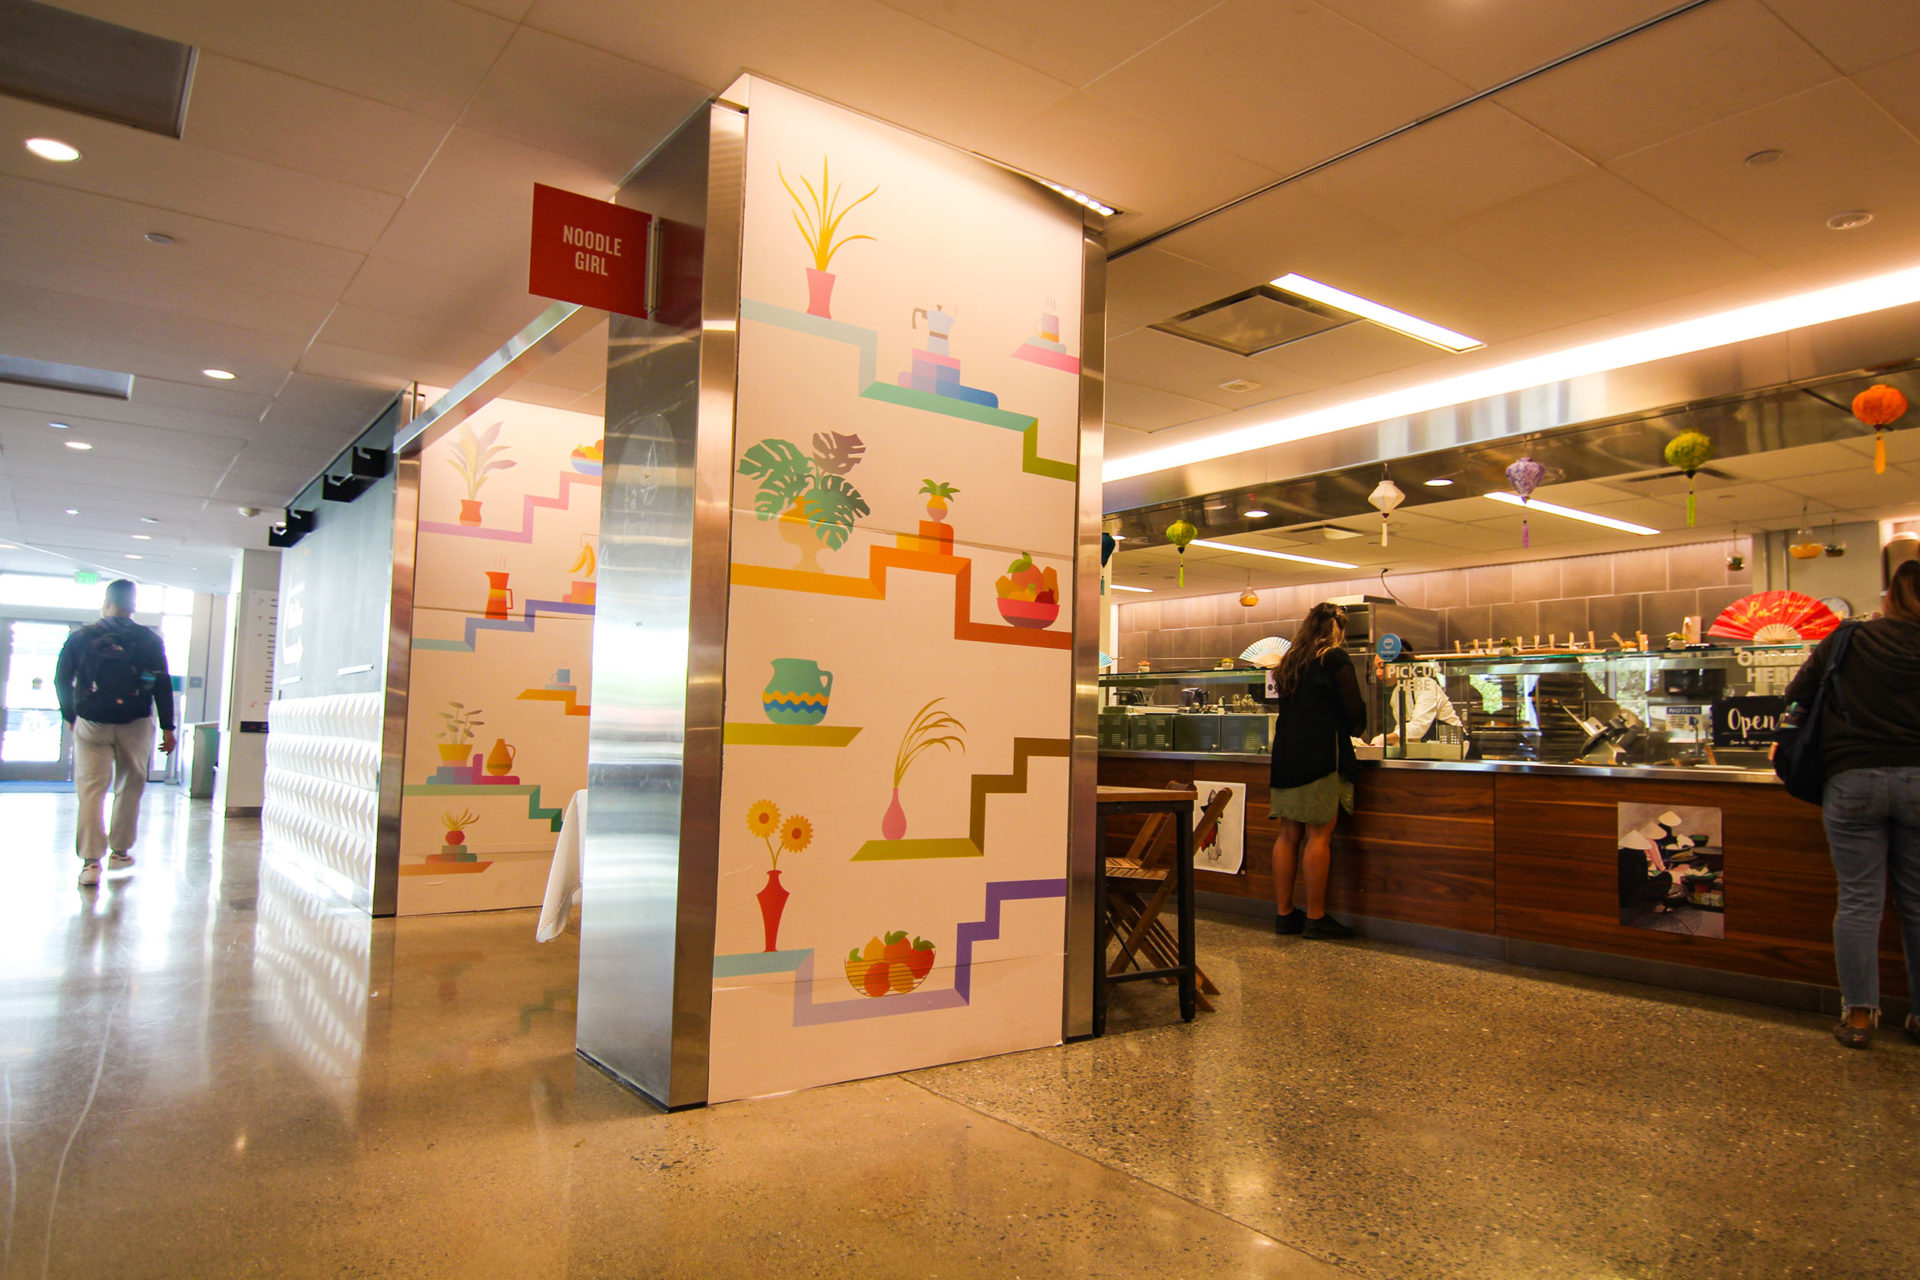 "Kitchen Tableau" is a series of four murals installed with adhesive vinyl in the dining room of the ASUC Student Union.